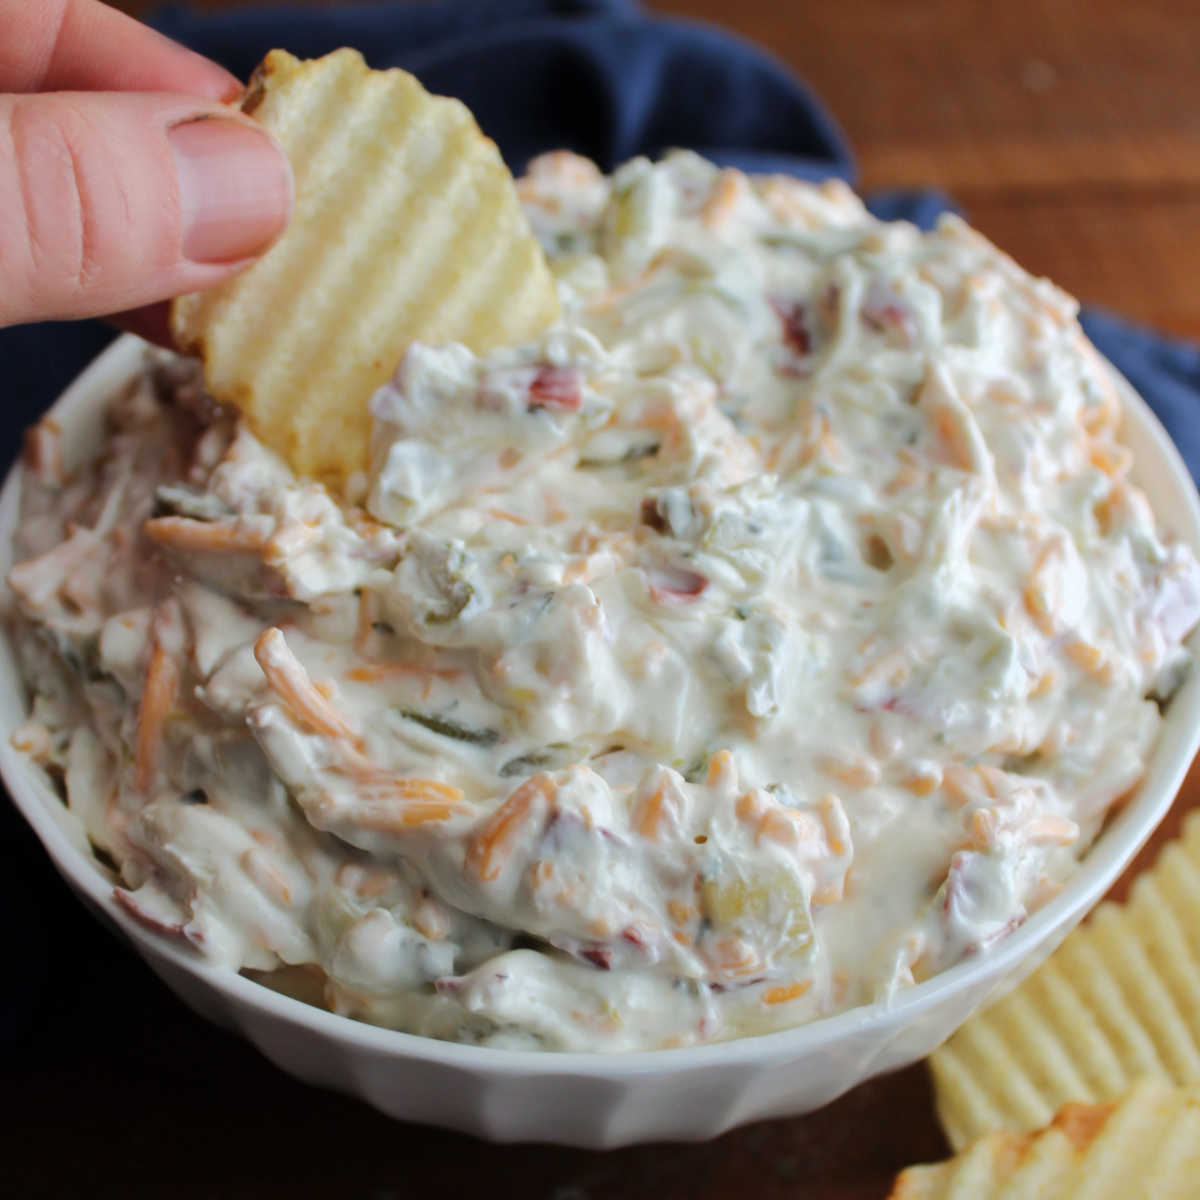 Dipping ruffled chip into dill pickle dip with shredded cheddar cheese and dried beef inside.